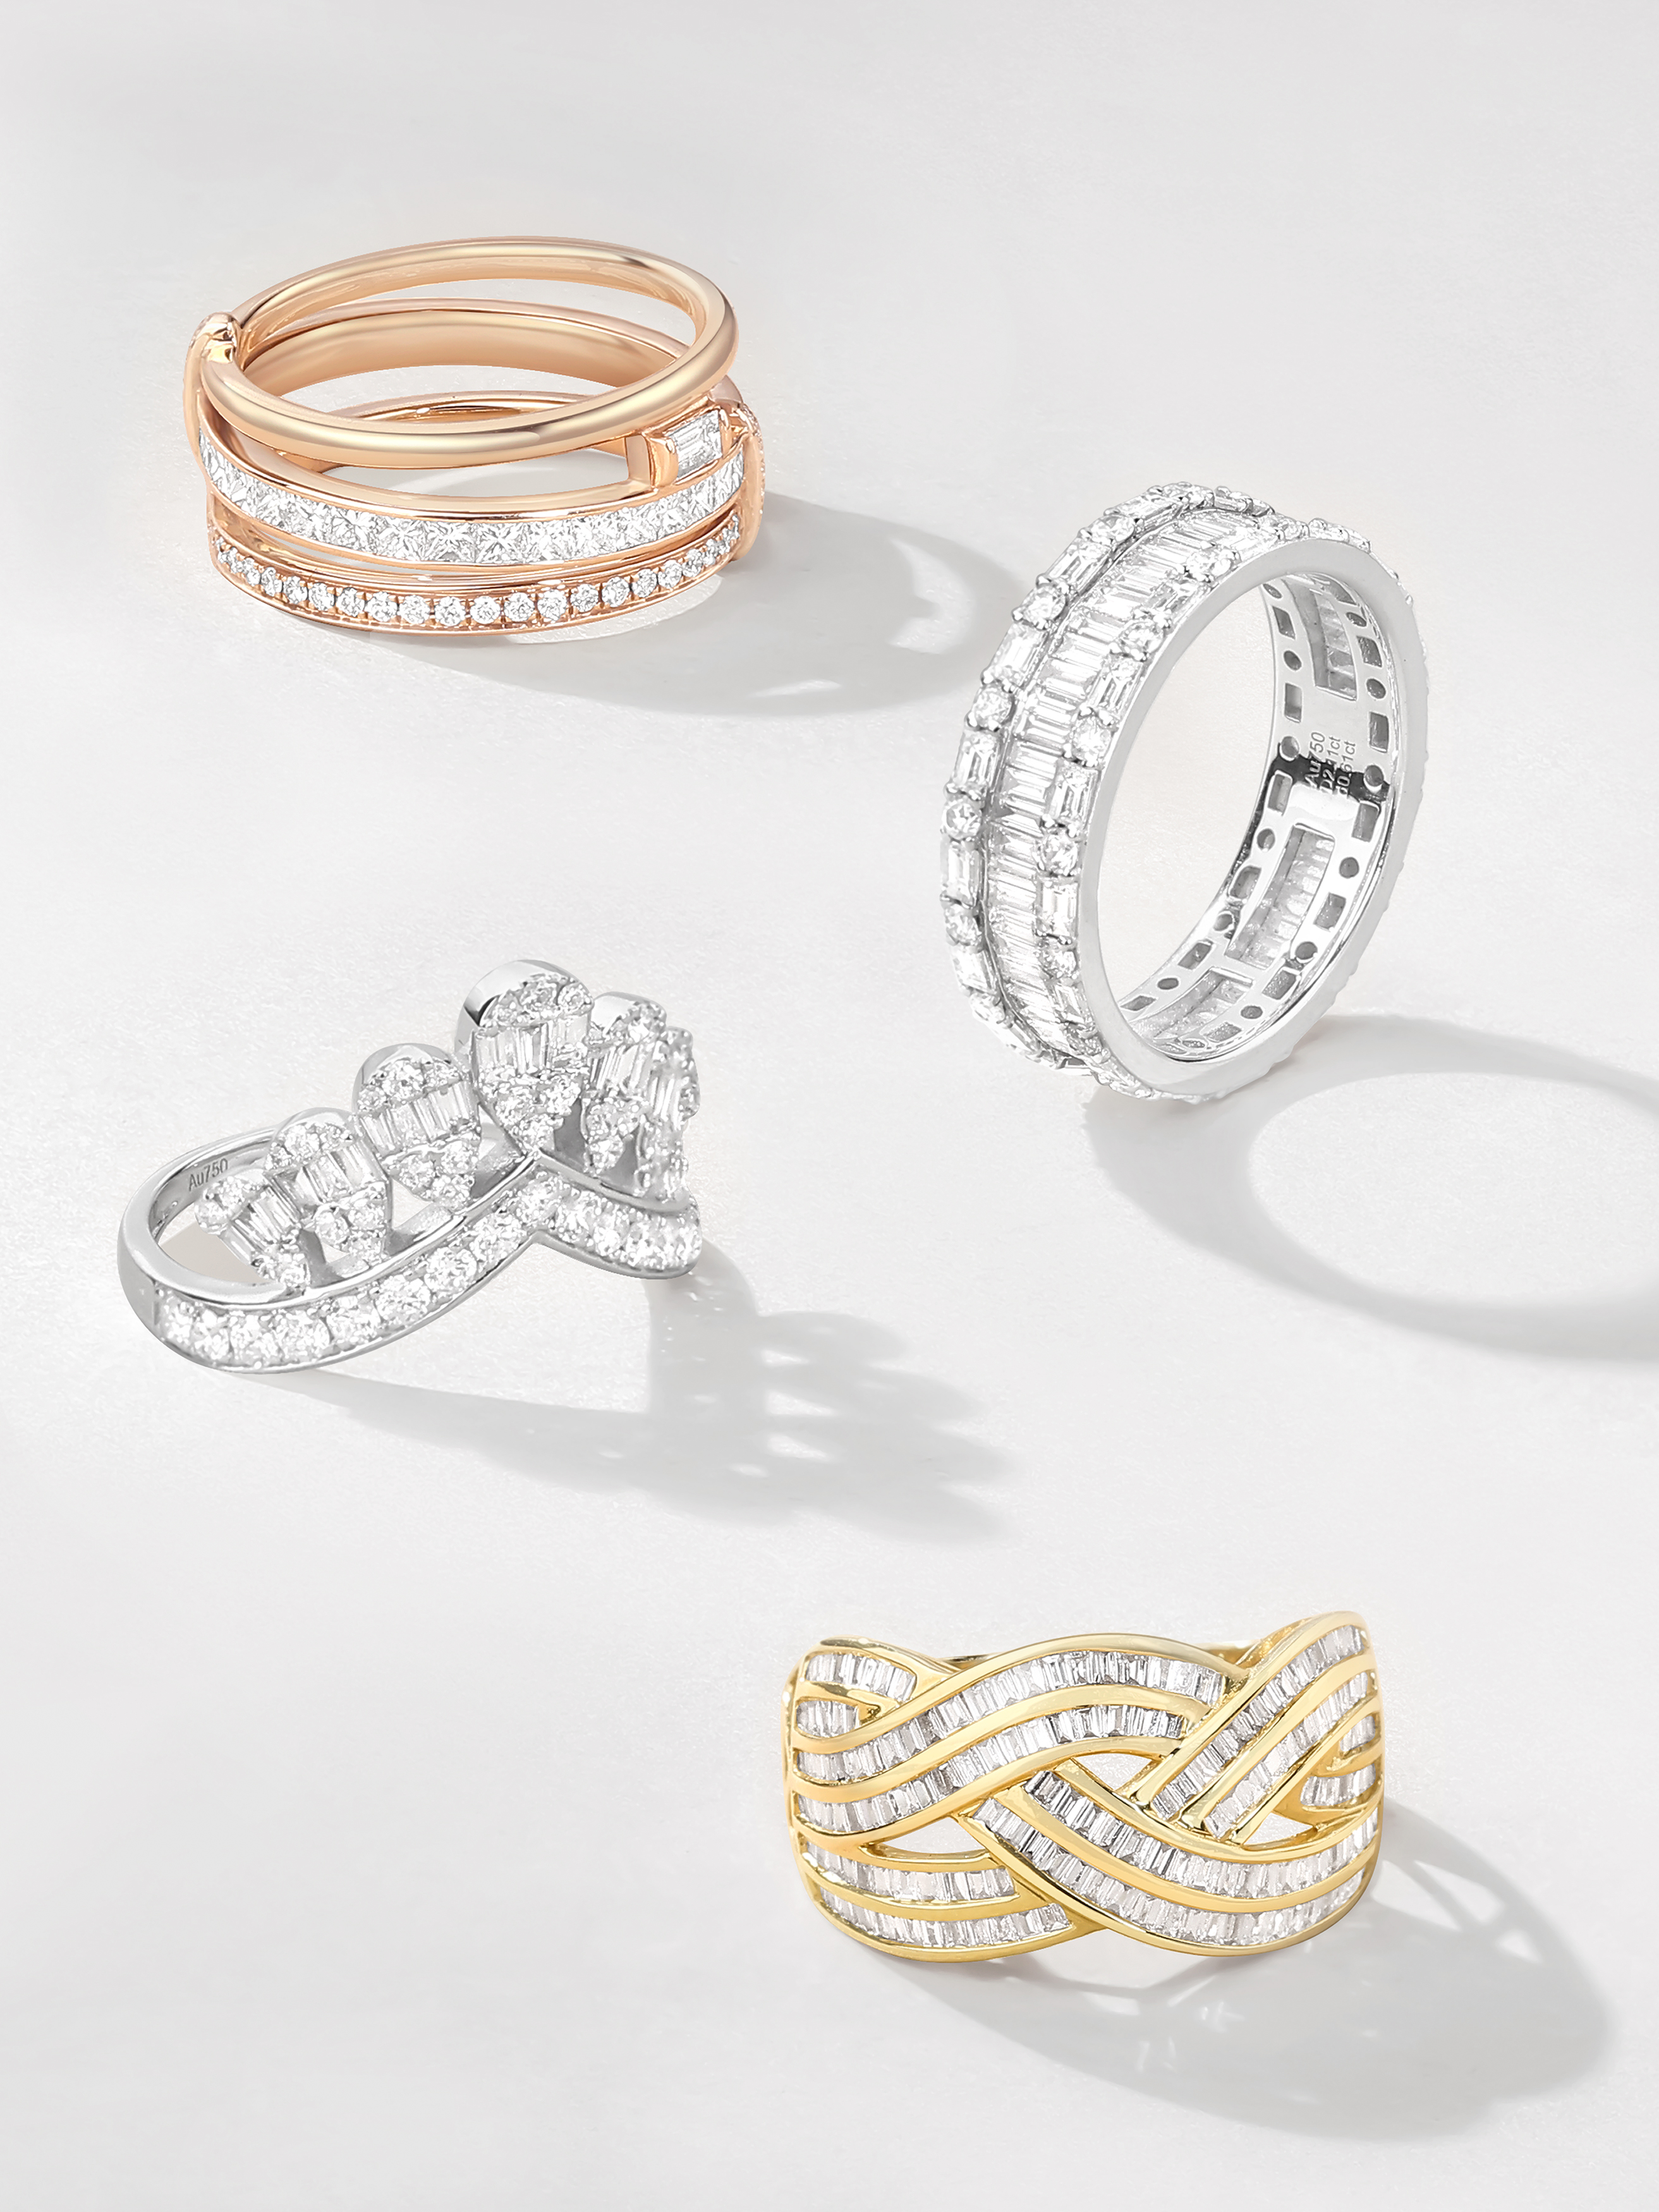 Experience the luxury of luxury wedding bands at POYAS Jewelry